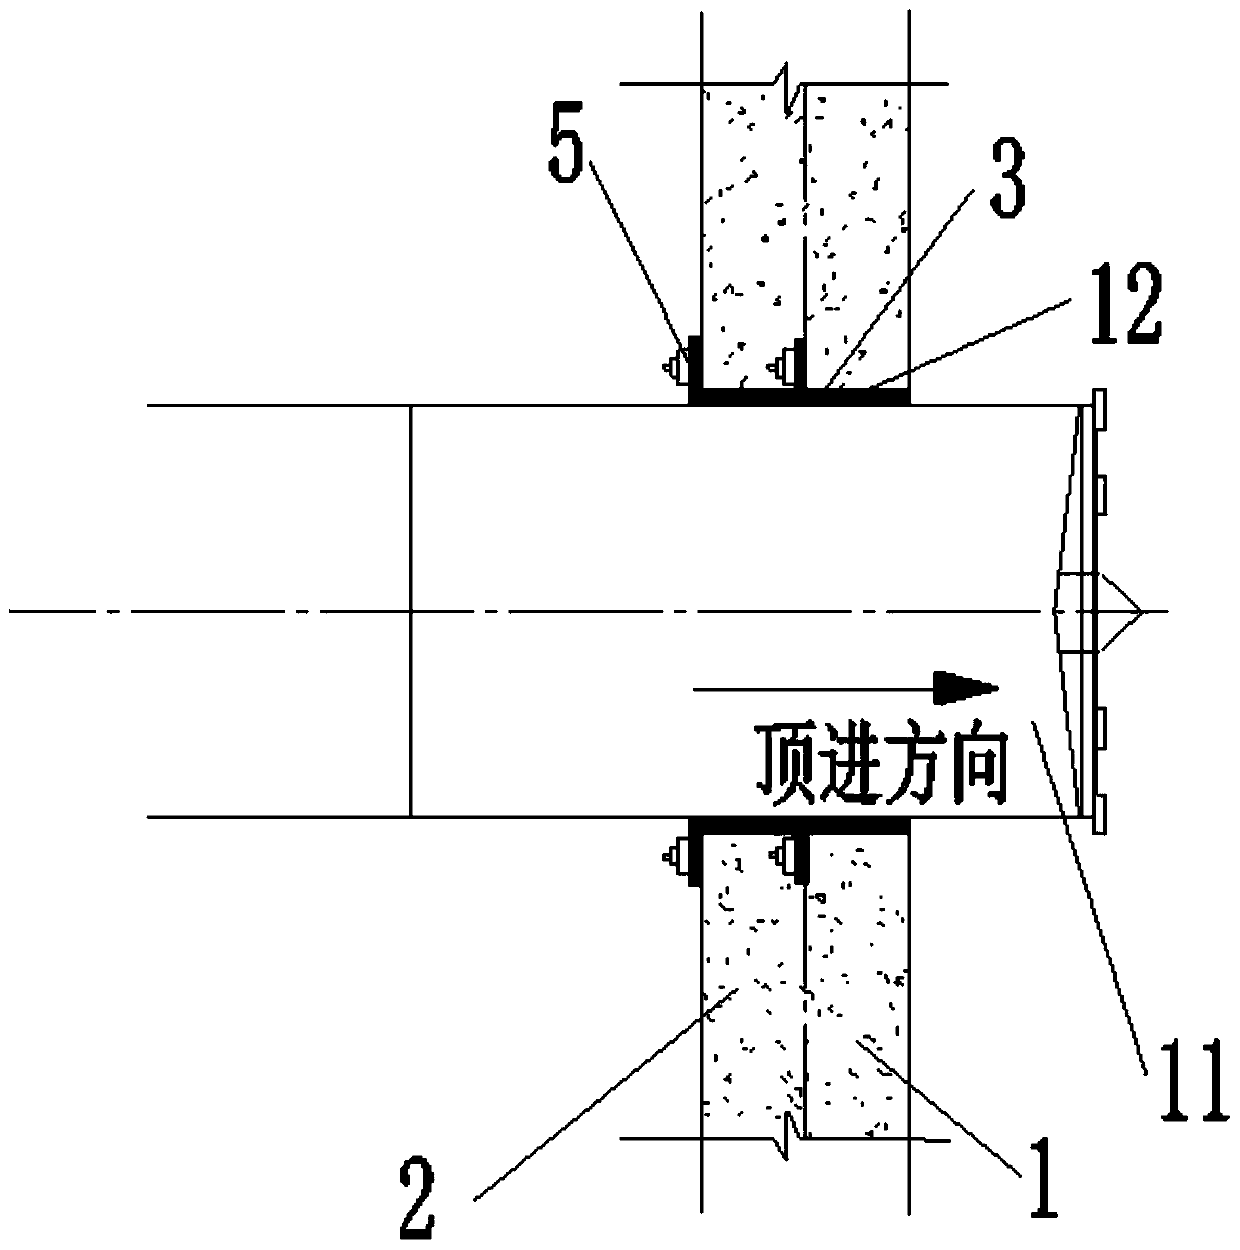 A water-stopping method and device for pipe-jacking entry and exit holes suitable for areas with deep, thick, water-rich sand layers